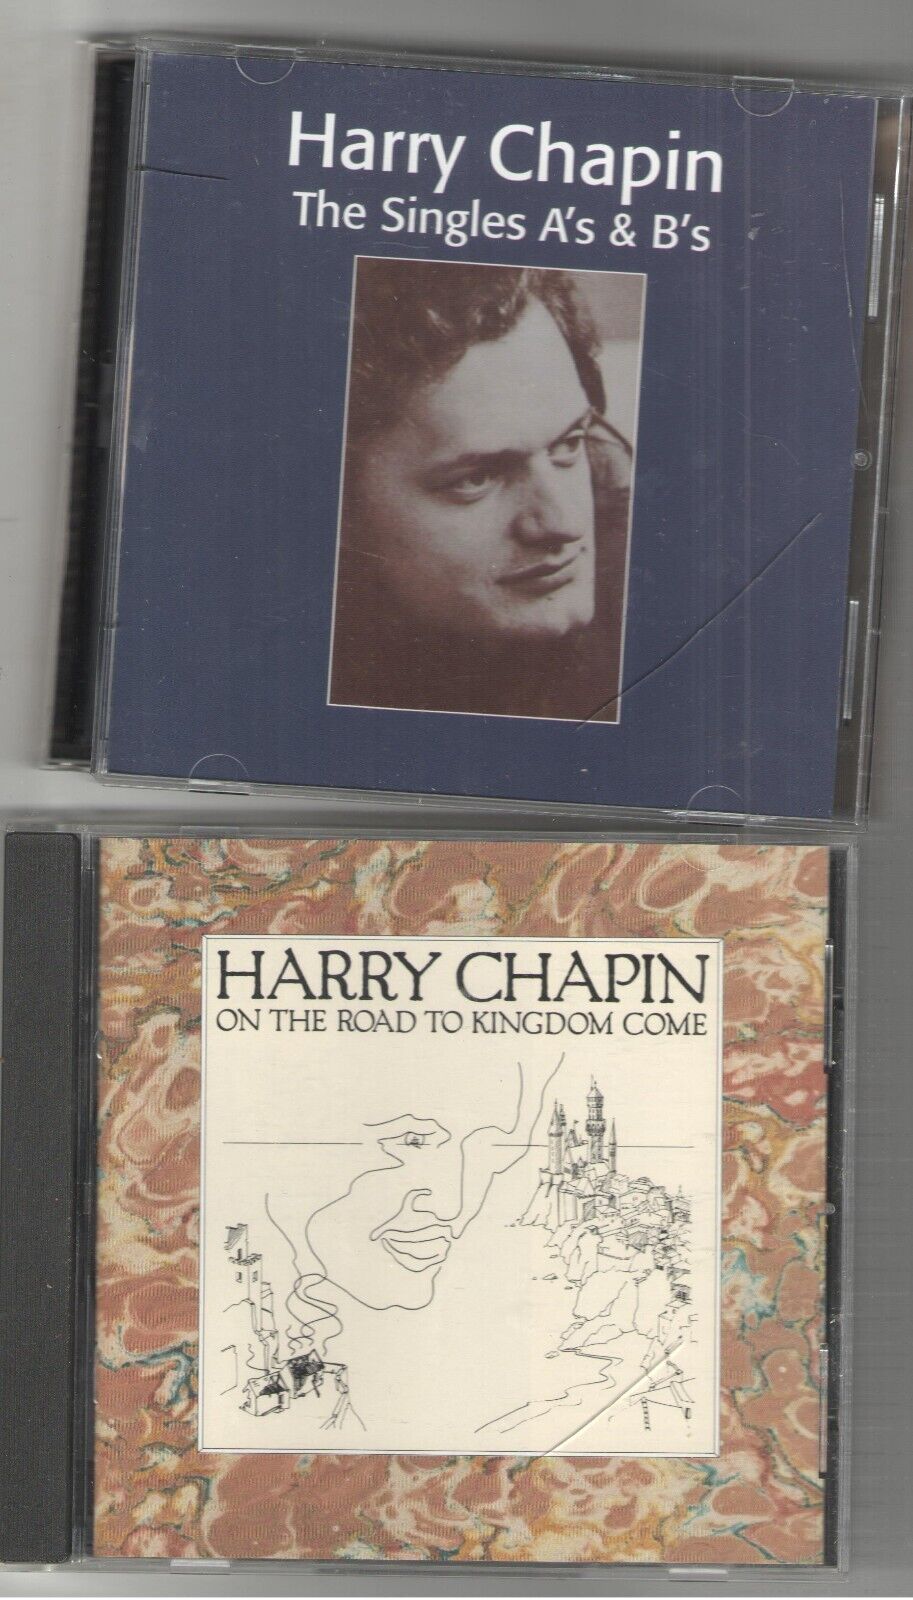 HARRY CHAPIN 3 CD : The Singles A\'s & B\'s ; On the Road to Kingdom Come